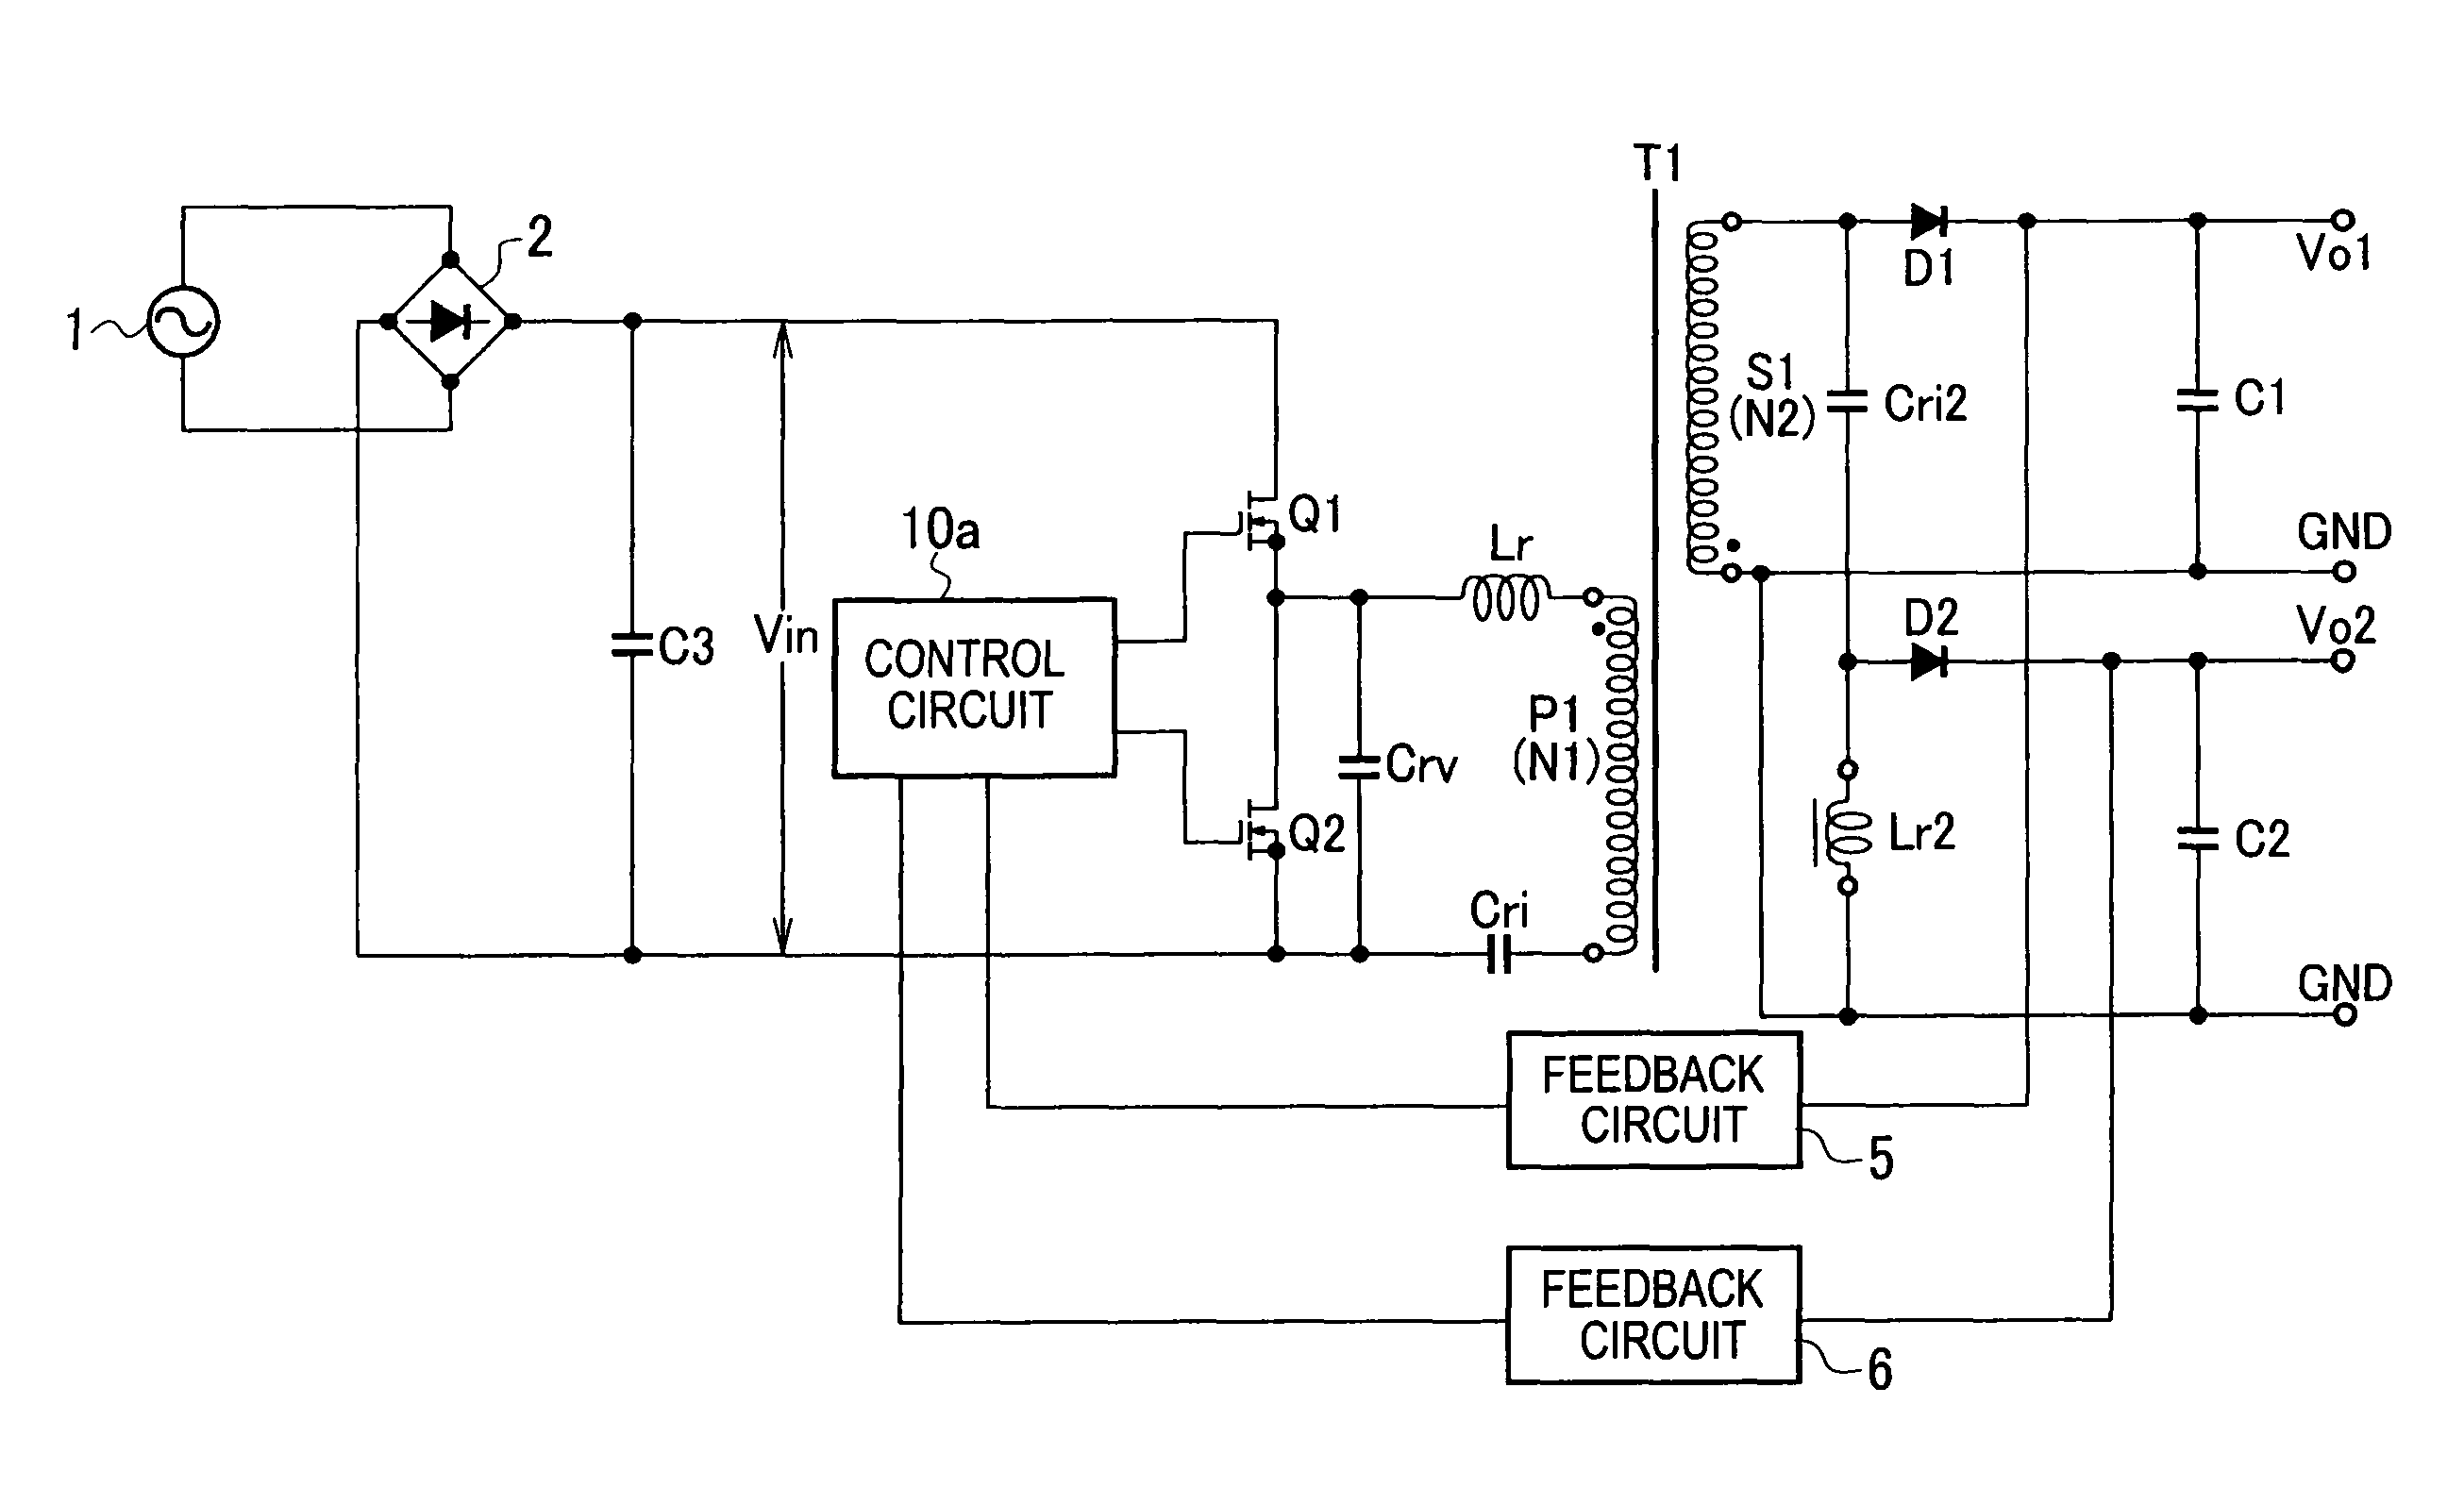 Multiple output switching power source apparatus including multiple series resonant circuits